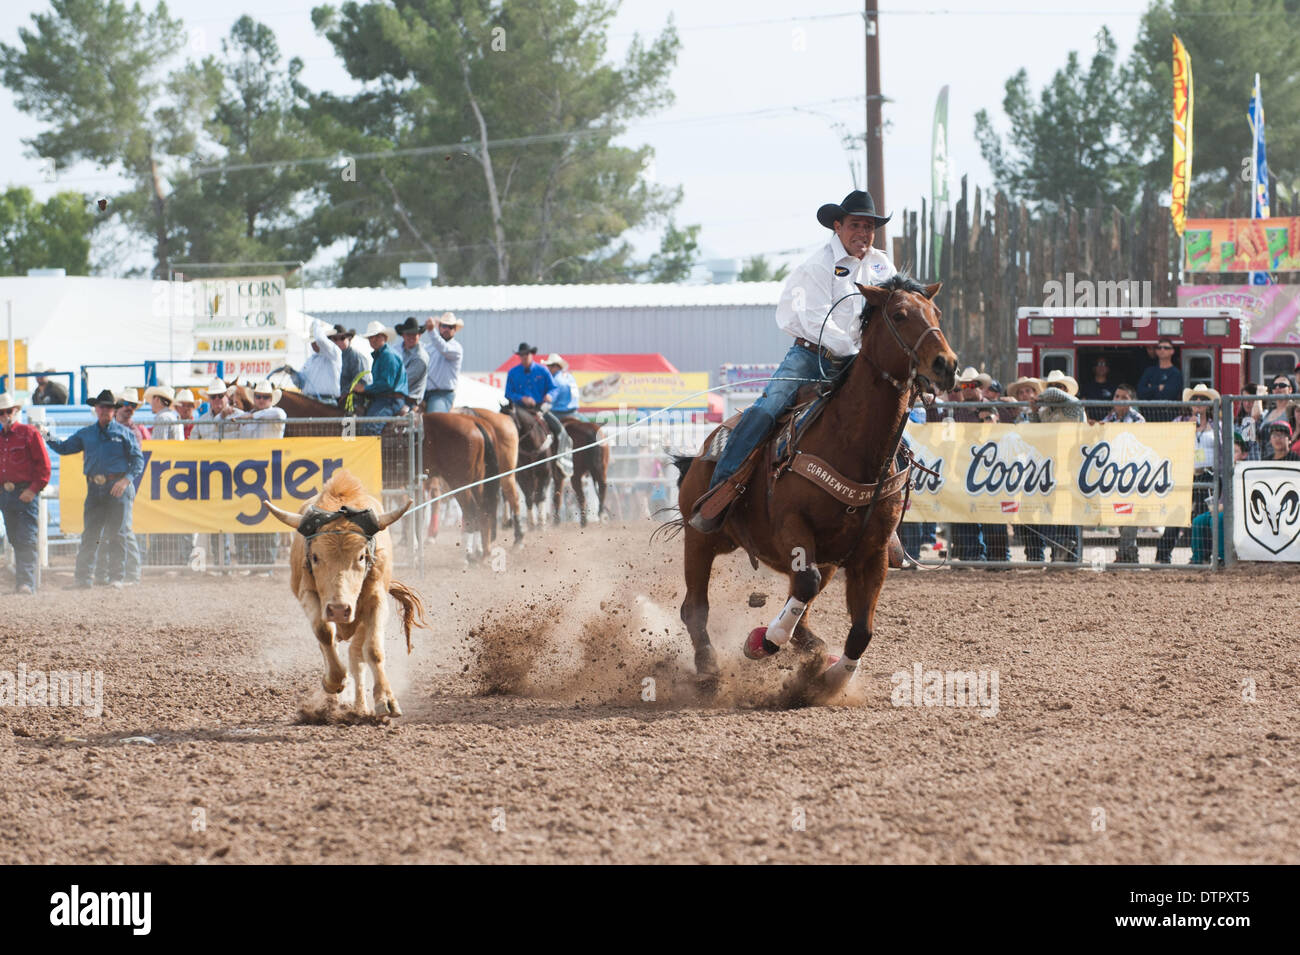 Tucson, Arizona, USA. 22nd Feb, 2014. LEE KIEHNE ropes his steer during the team roping event at the Fiesta de los Vaqueros in Tucson, Ariz. Credit:  Will Seberger/ZUMAPRESS.com/Alamy Live News Stock Photo